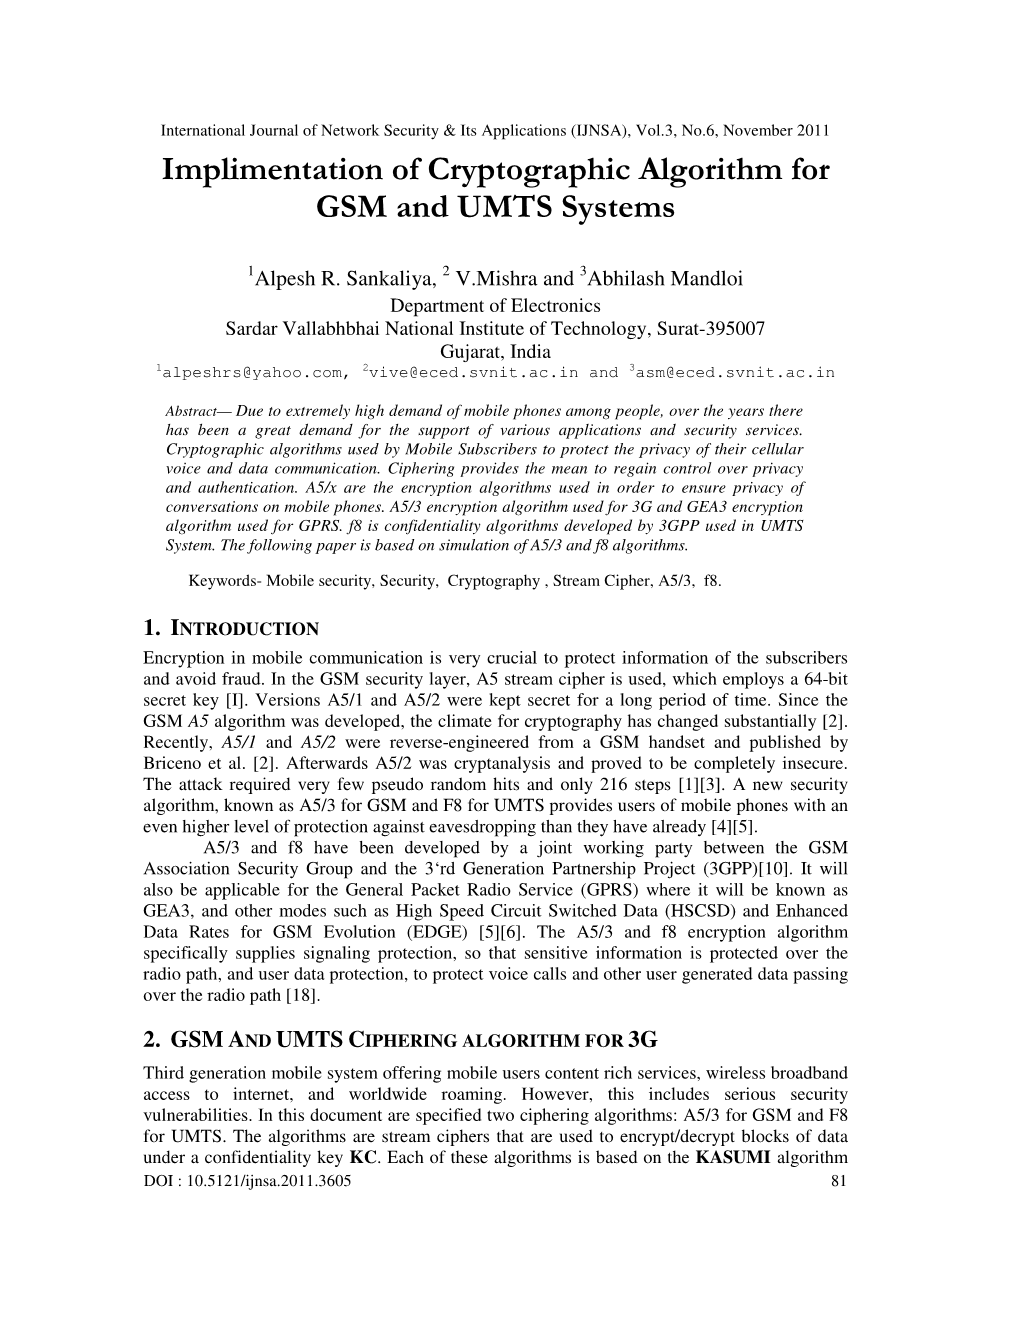 Implimentation of Cryptographic Algorithm for GSM and UMTS Systems